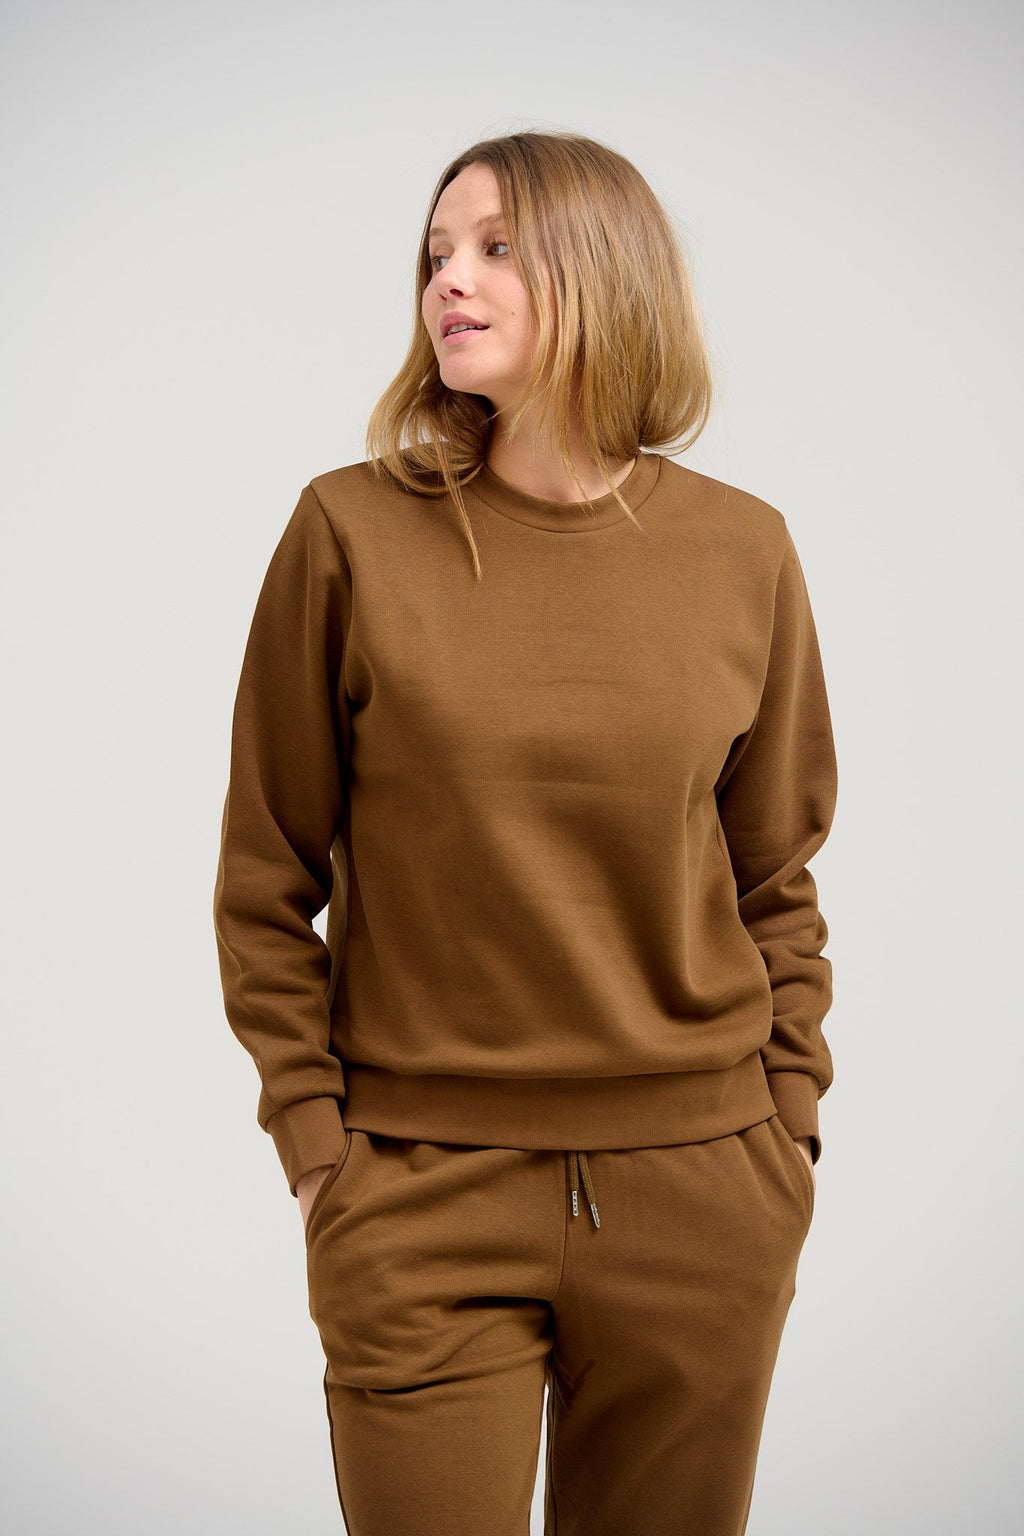 Basic SweatSuit with Crewneck (Brown) - Package Deal (Women)